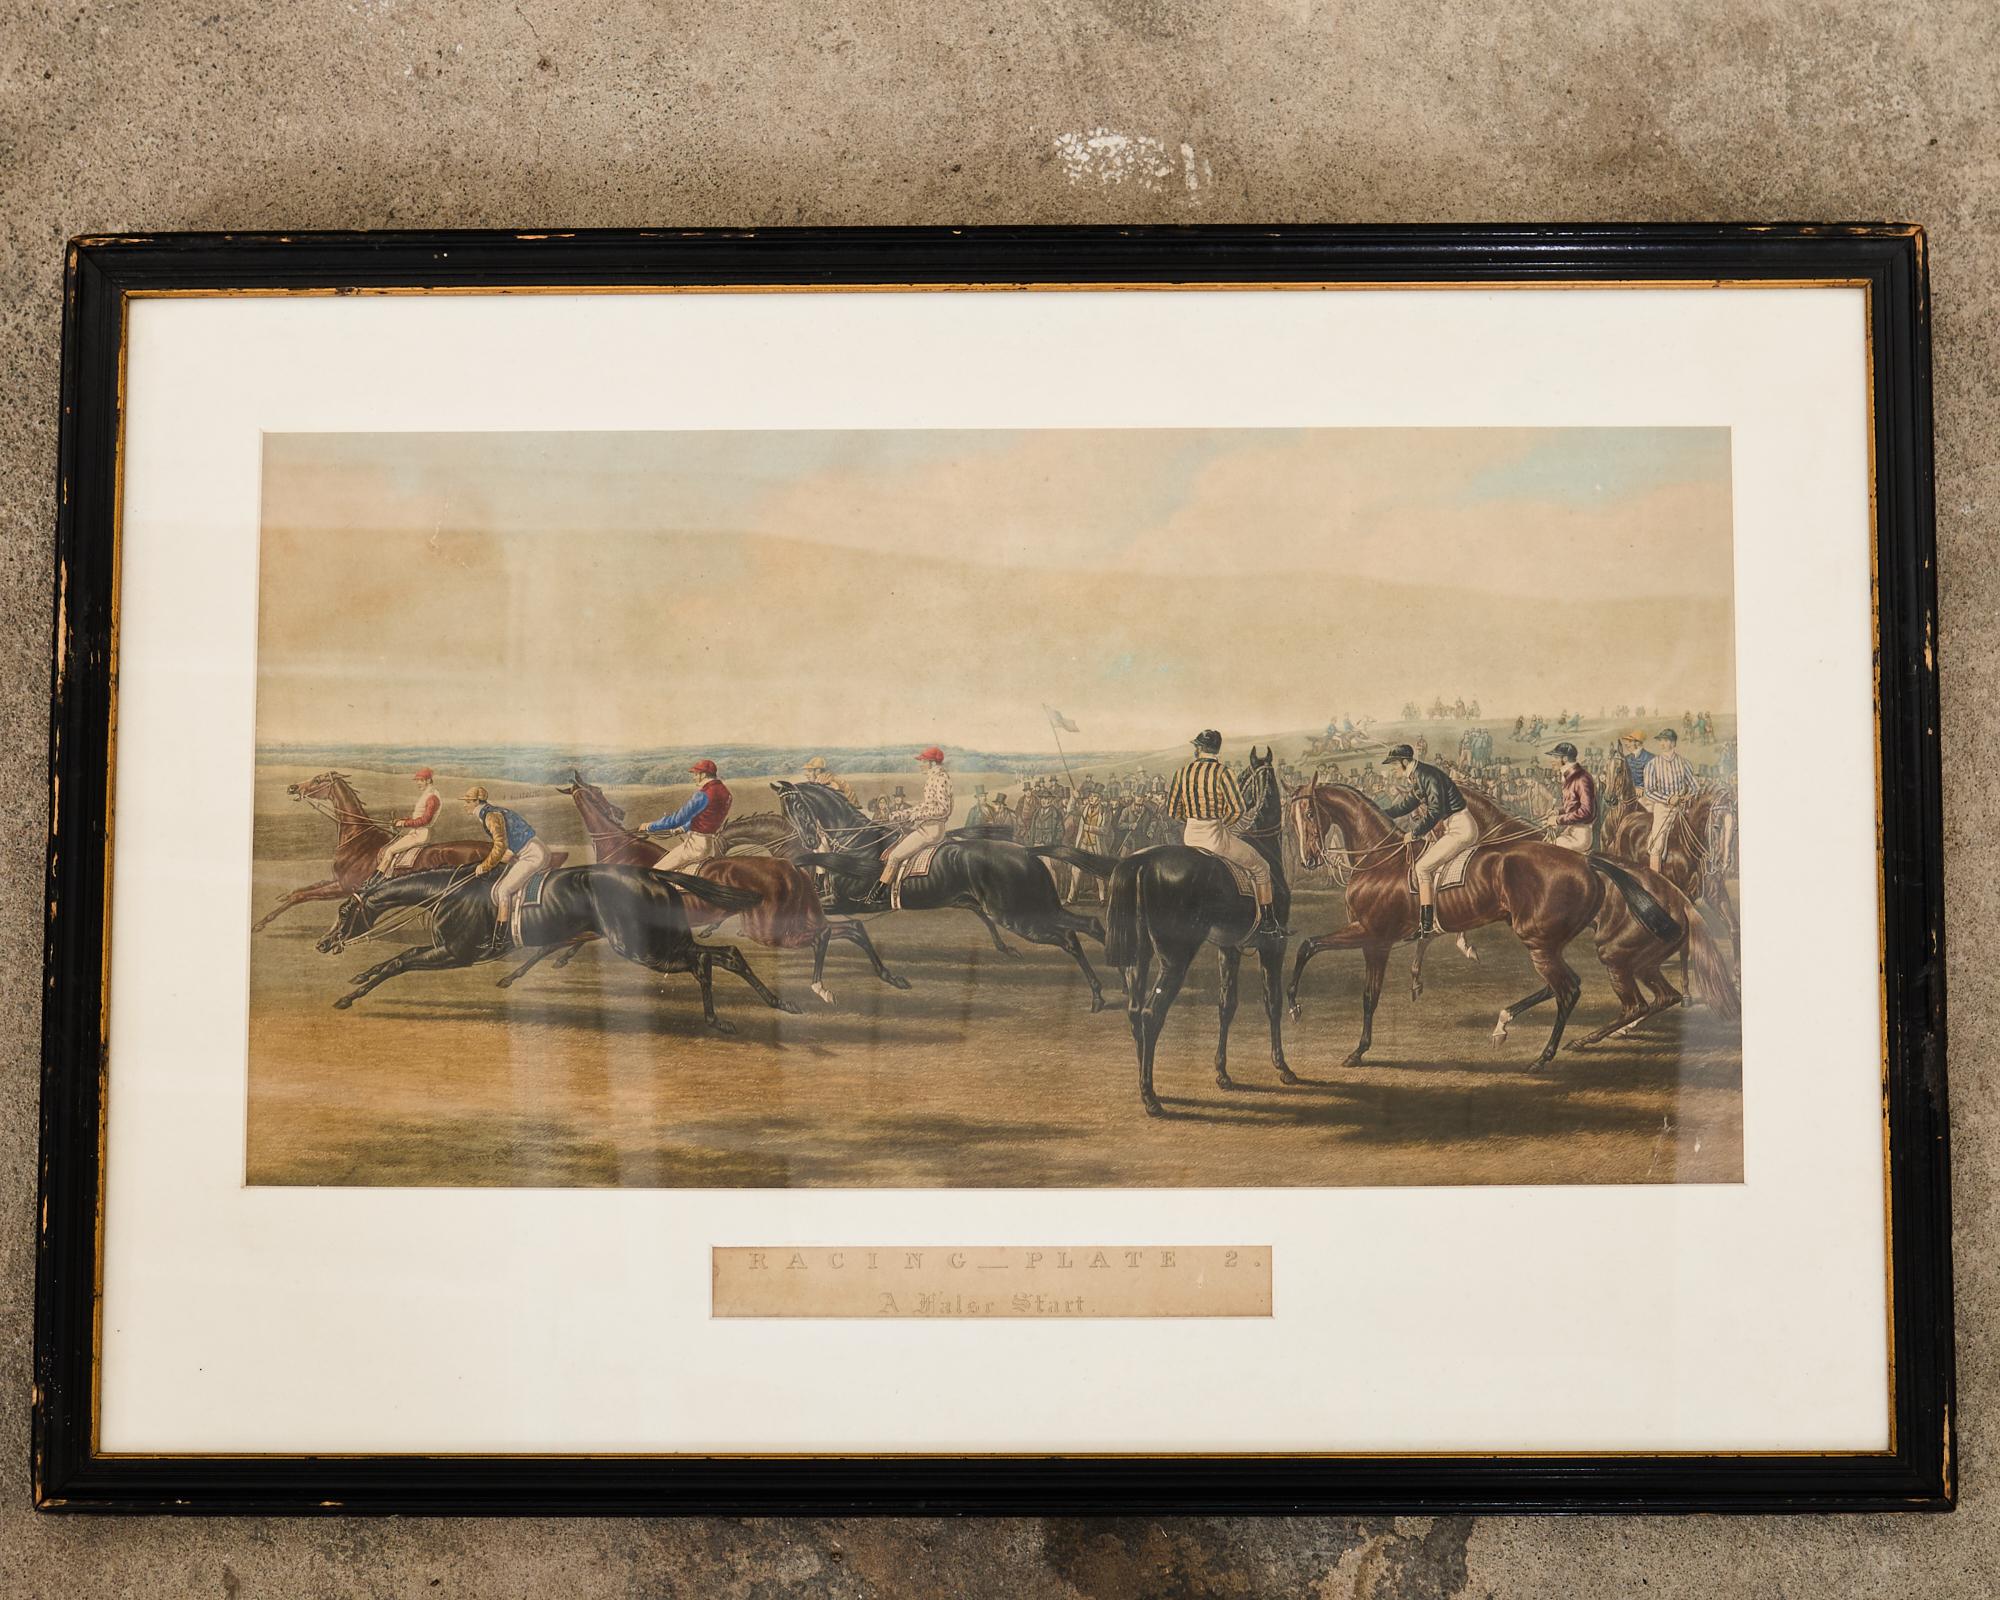 English Set of Four Fores' National Sports Equestrian Prints by Herring For Sale